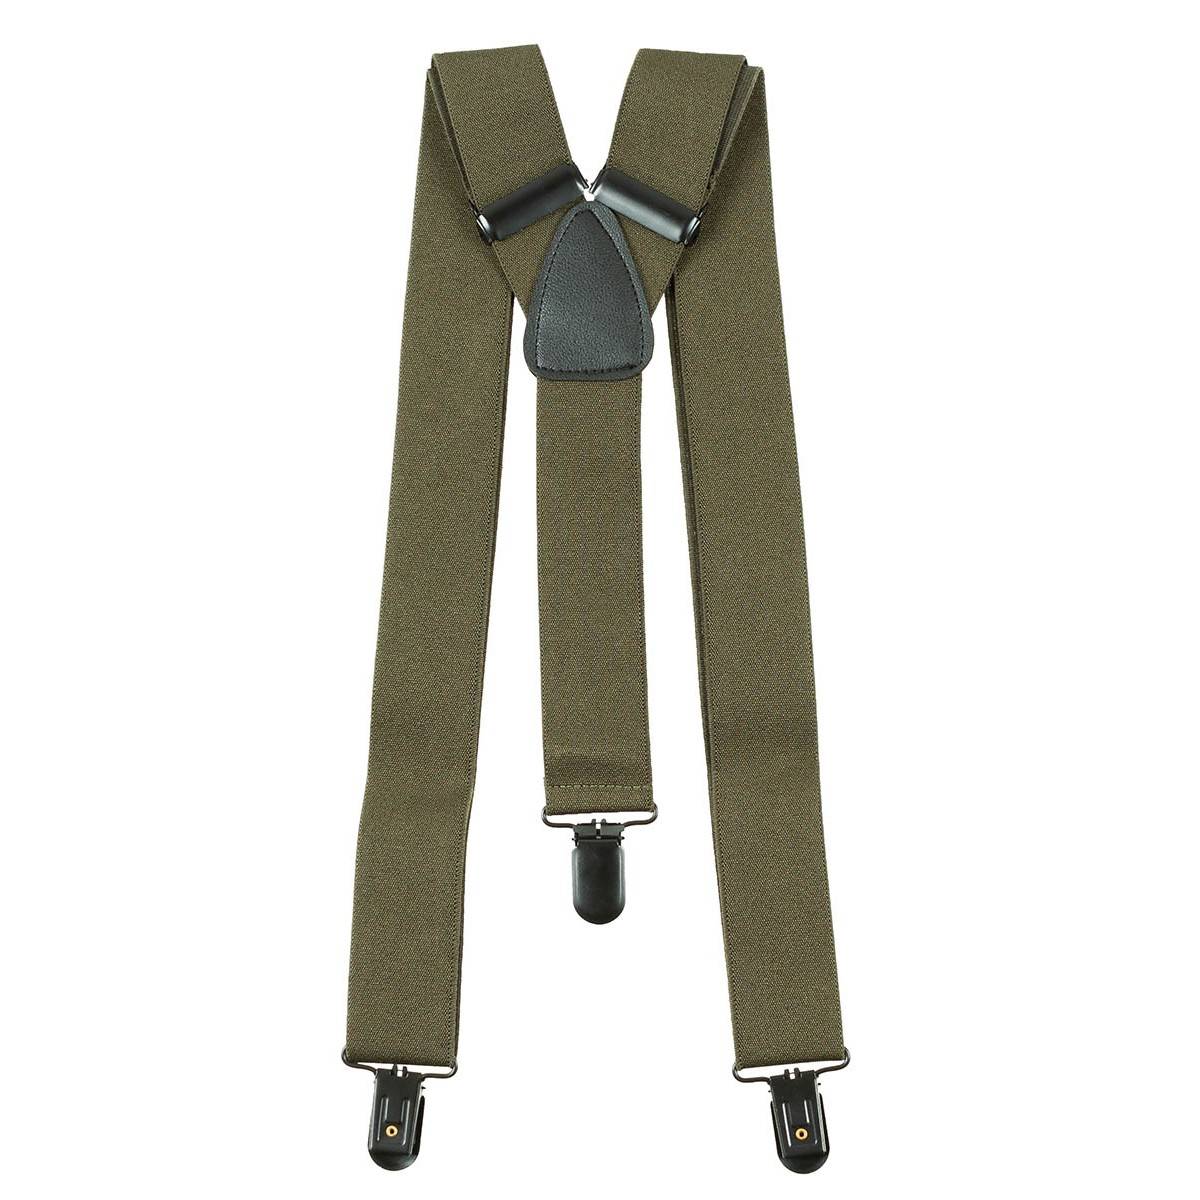 MFH® SUSPENDERS - ELASTIC - ADJUSTABLE - OD GREEN OD Green, Apparel \  Belts \ Trouser Suspenders , Army Navy Surplus -  Tactical, Big variety - Cheap prices